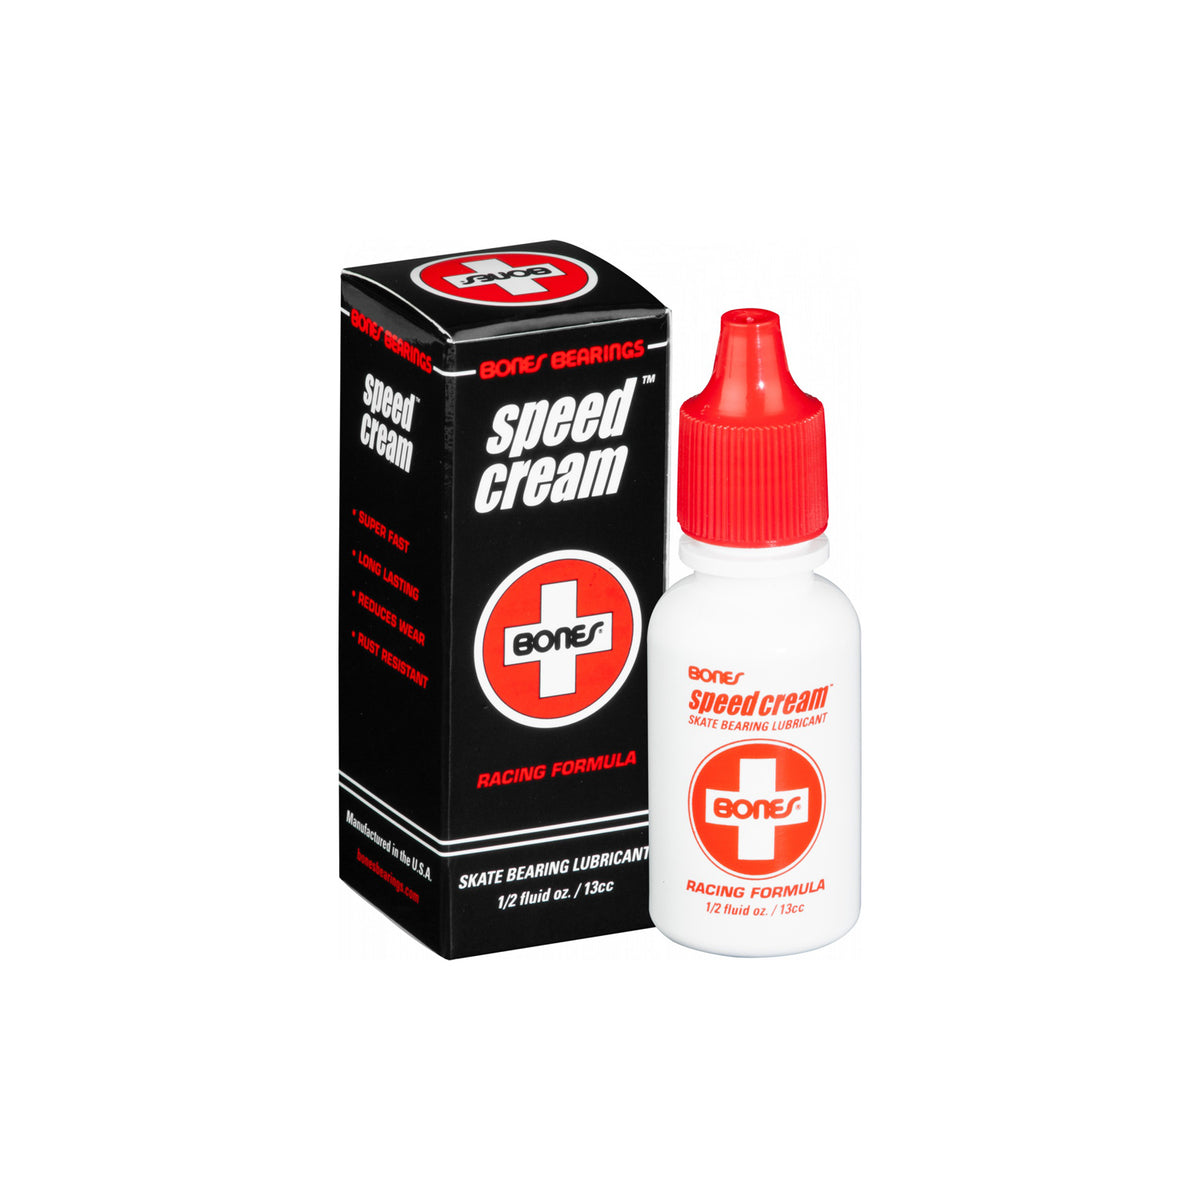 White and Red Bottle of Bearing Lubricant